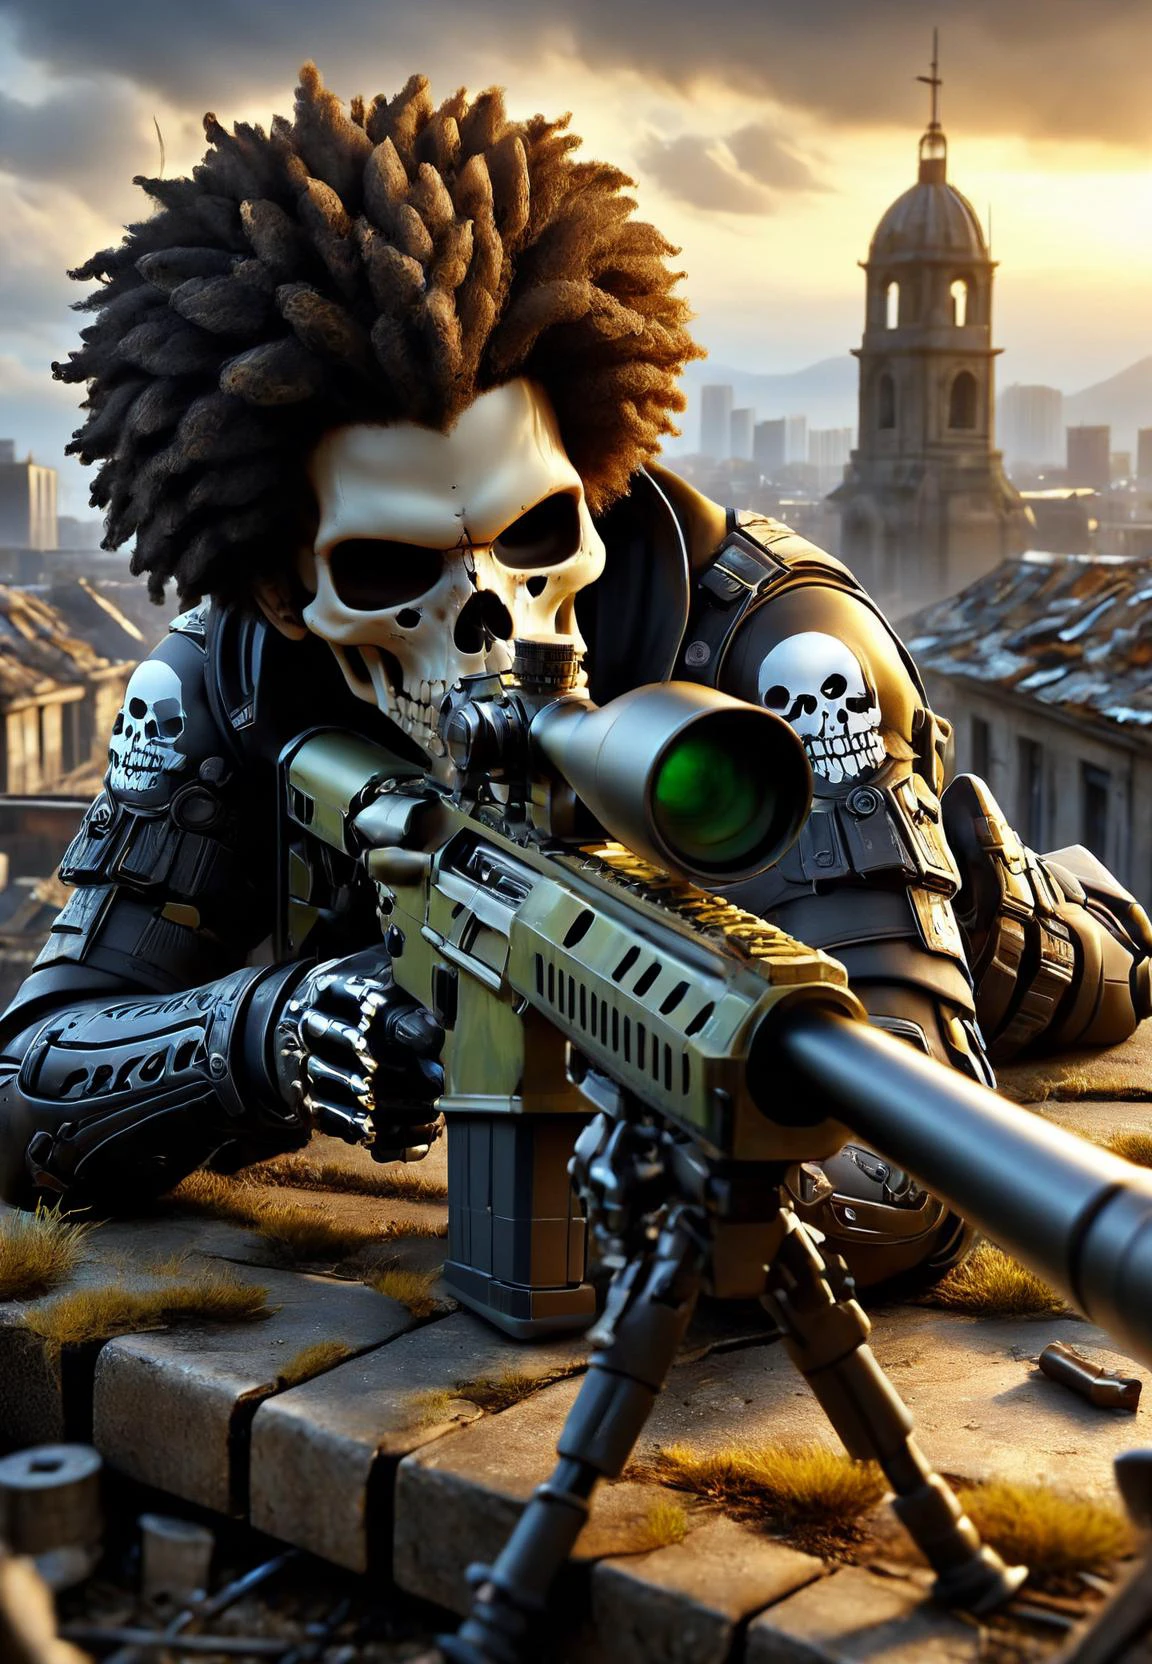 AmAzing quAlity, mAsterpiece, best quAlity, hyper detAiled, ultrA detAiled, 超高畫質, 景深, detAil eyes, from Above, 天空線,
A (颅骨:1.4) with Afro hAir lAying on the roof, cAmouflAge suit, Aiming At the cAmerA, Action shot, 反射光, 古老建築, AbAndoned city, wAr,
狙擊槍, cArtridge cAse,
